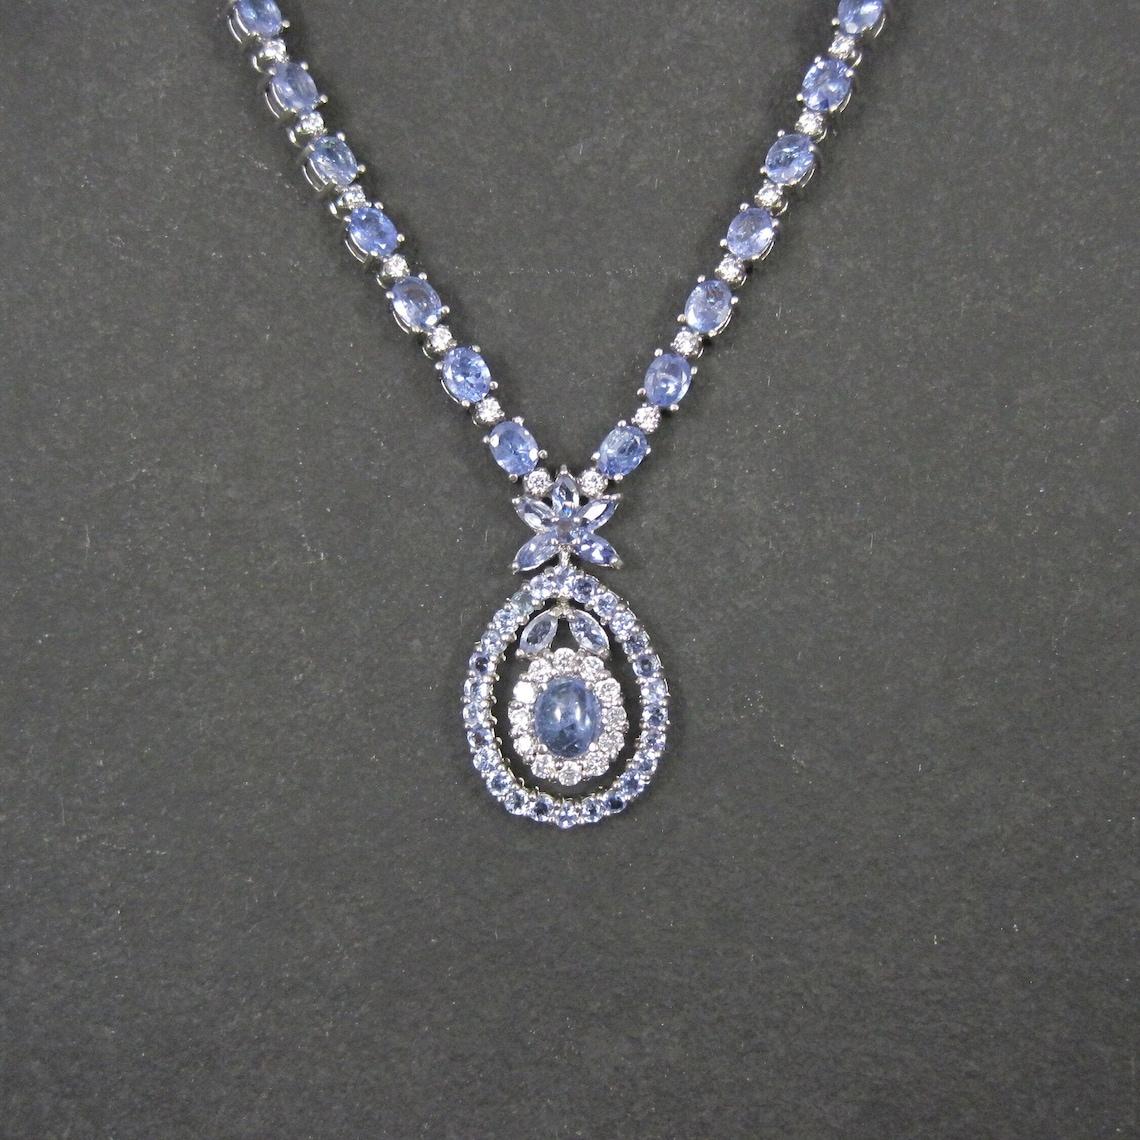 This stunning estate necklace is sterling silver.
It features tanzanites in a combination of 54 oval cut 4x6mm, 7 marquise cut 3x5mm, 29 round cut 2.5mm, and a single oval cabochon cut measuring 6x8mm.
The accent stones are cubic zirconia.

Note